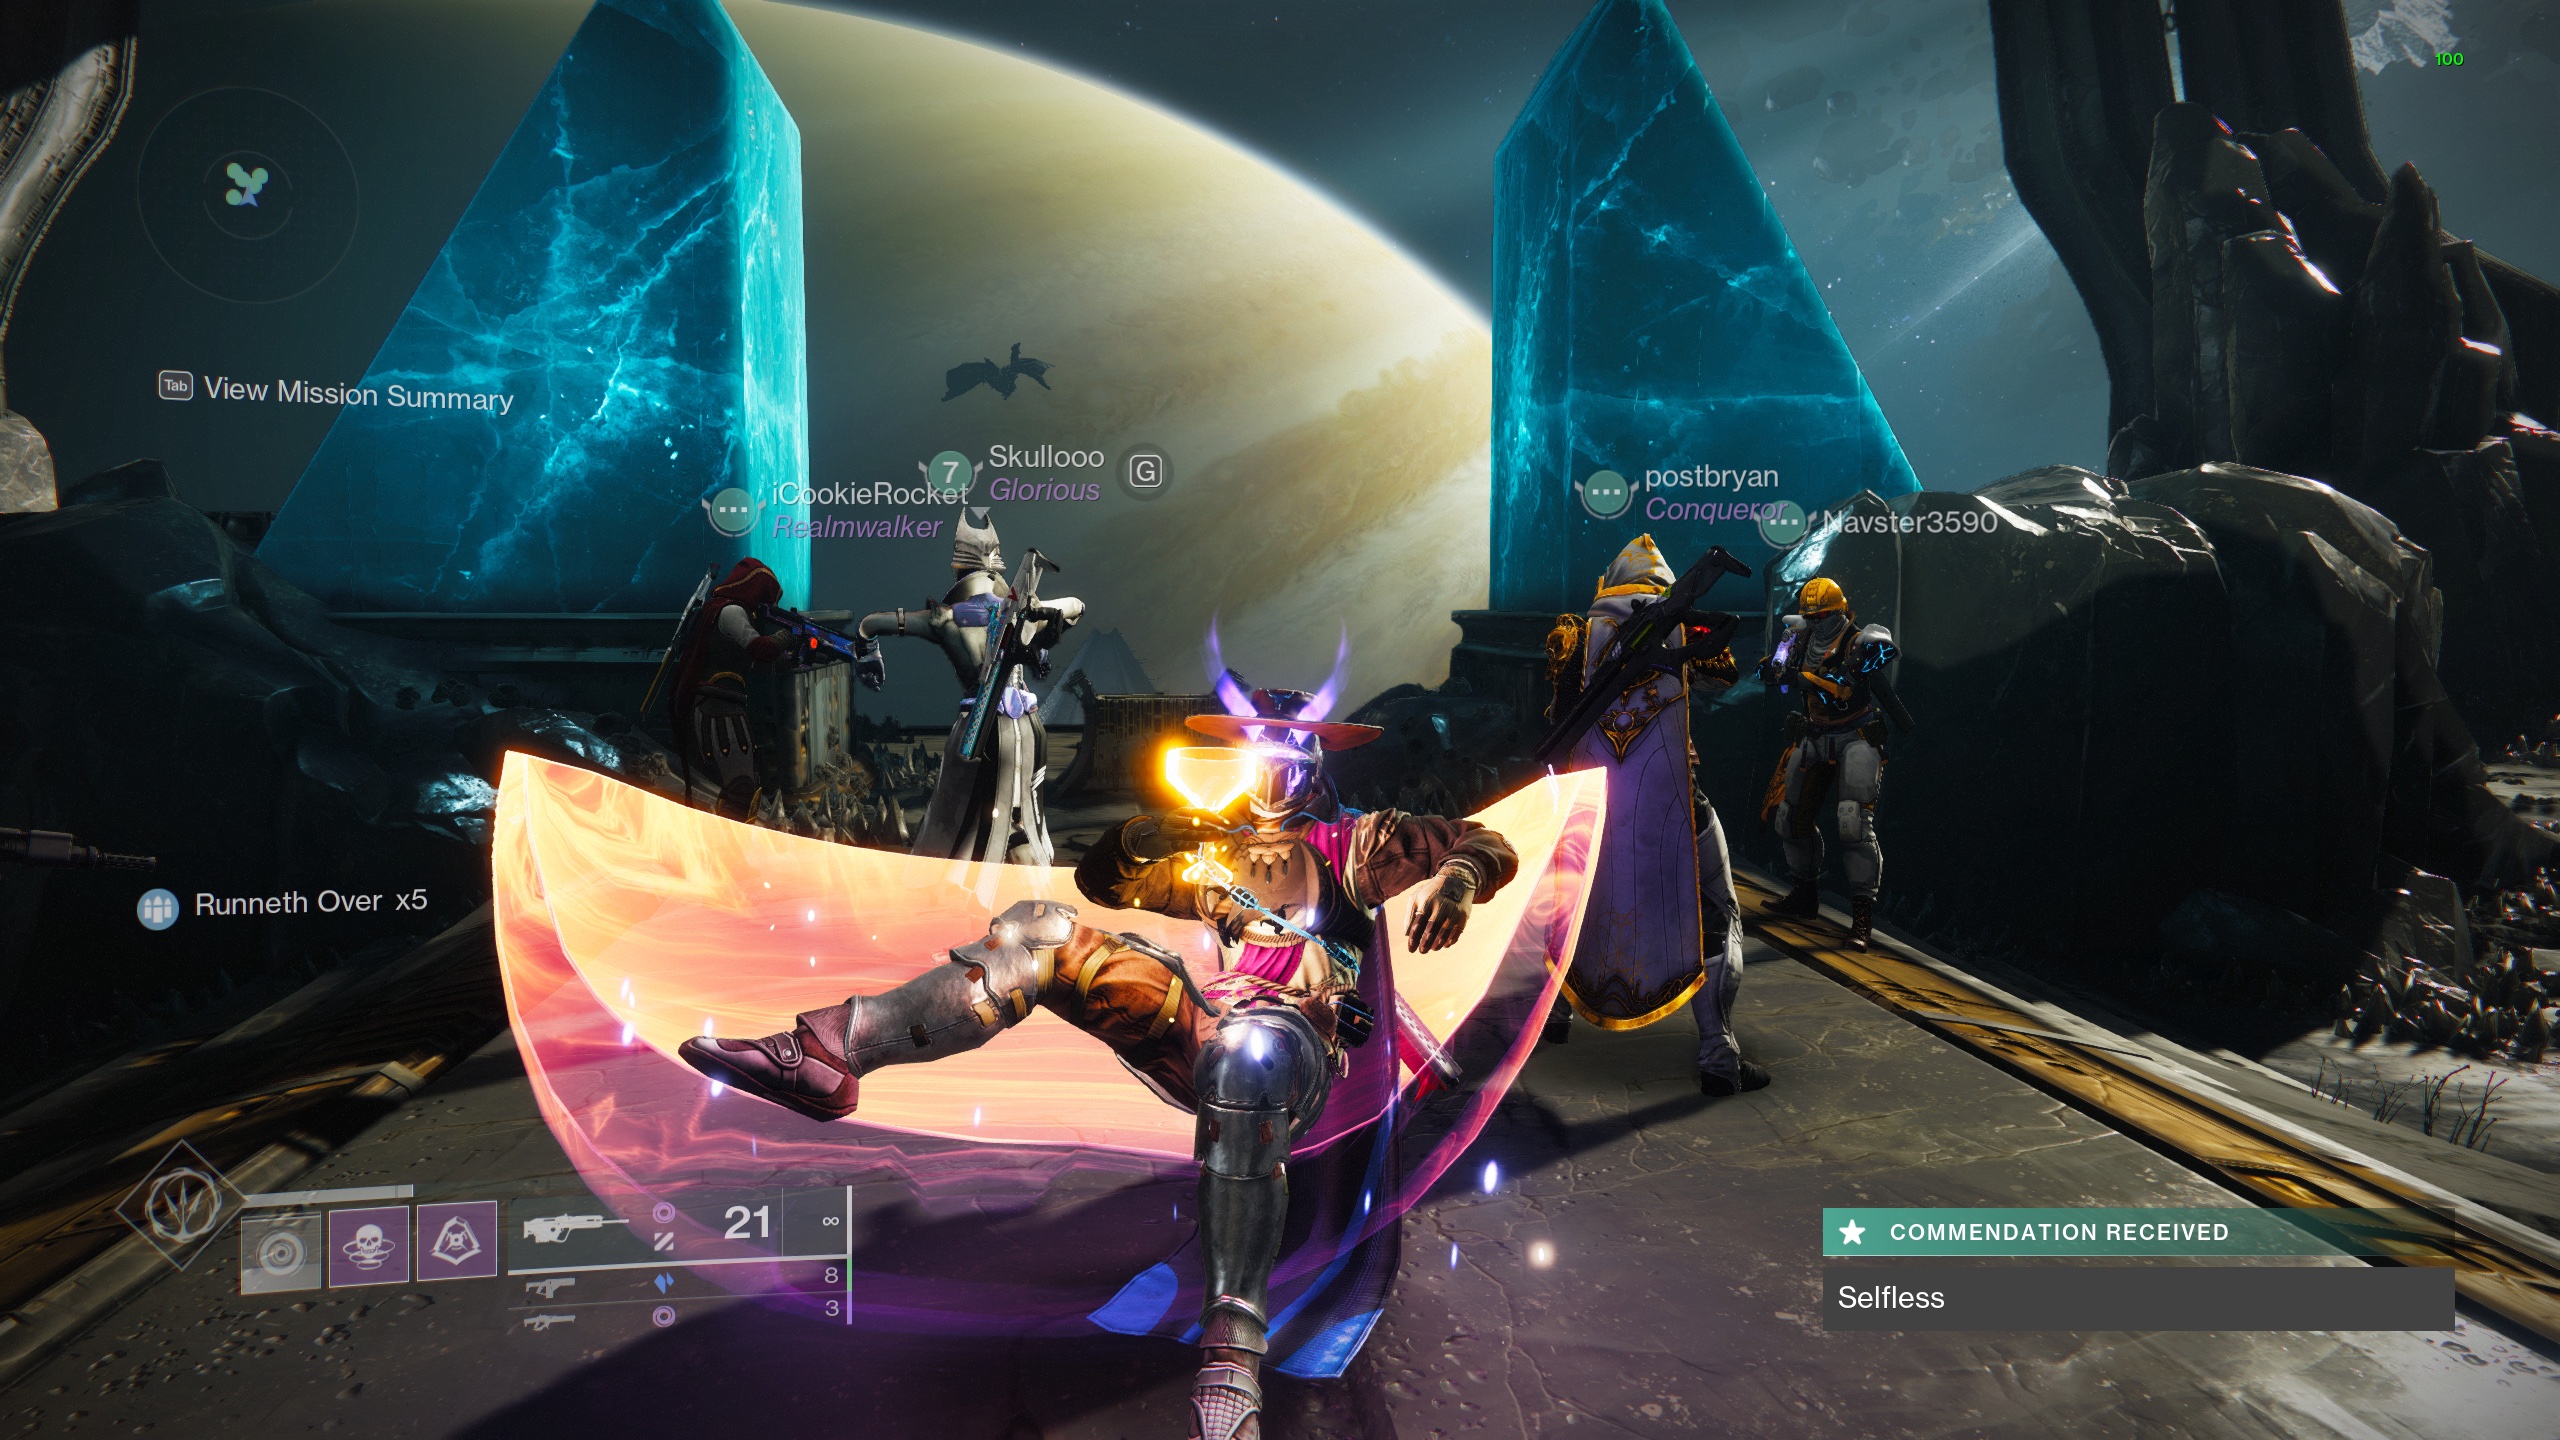 A screenshot from Destiny 2 showing several player characters at the edge of a platform. It depicts the final scene after victory over Oryx in the Kings Fall raid. A player is emoting sitting in a luxurious chair swirling a wine glass.